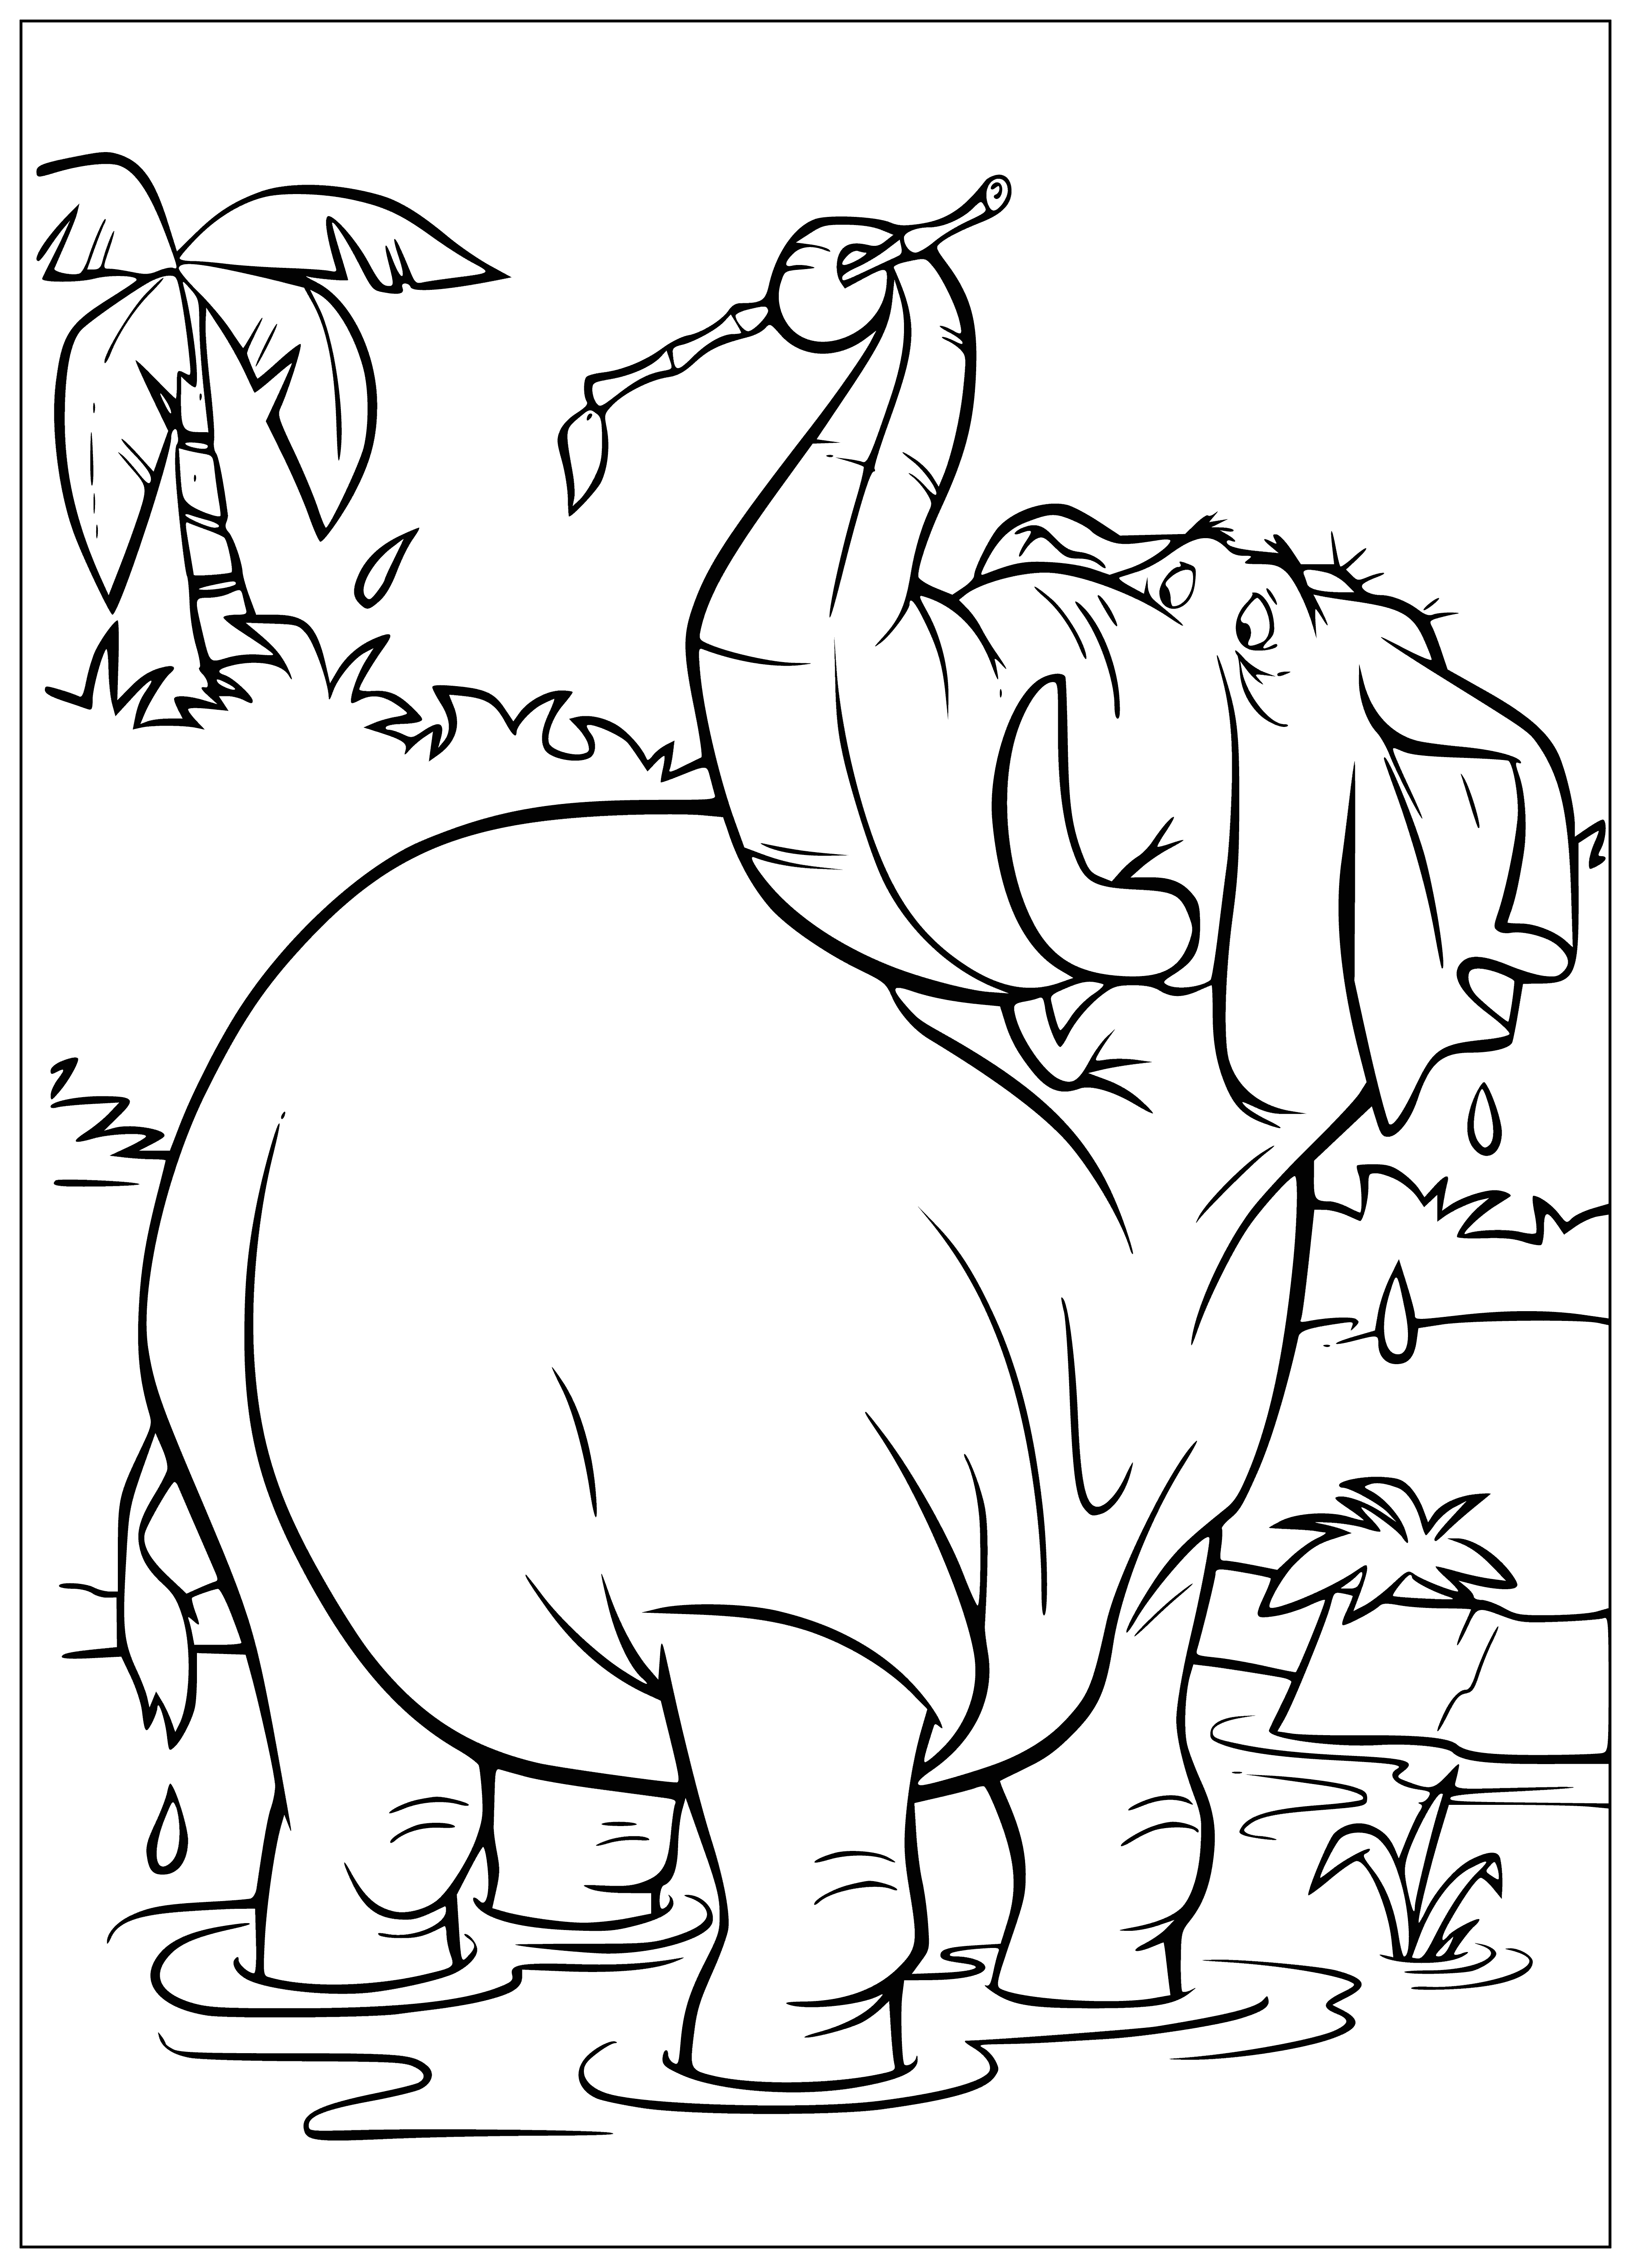 coloring page: Mowgli is raised in the jungle by wolves and befriends Baloo the bear who teaches him the ways of the jungle in The Jungle Book.